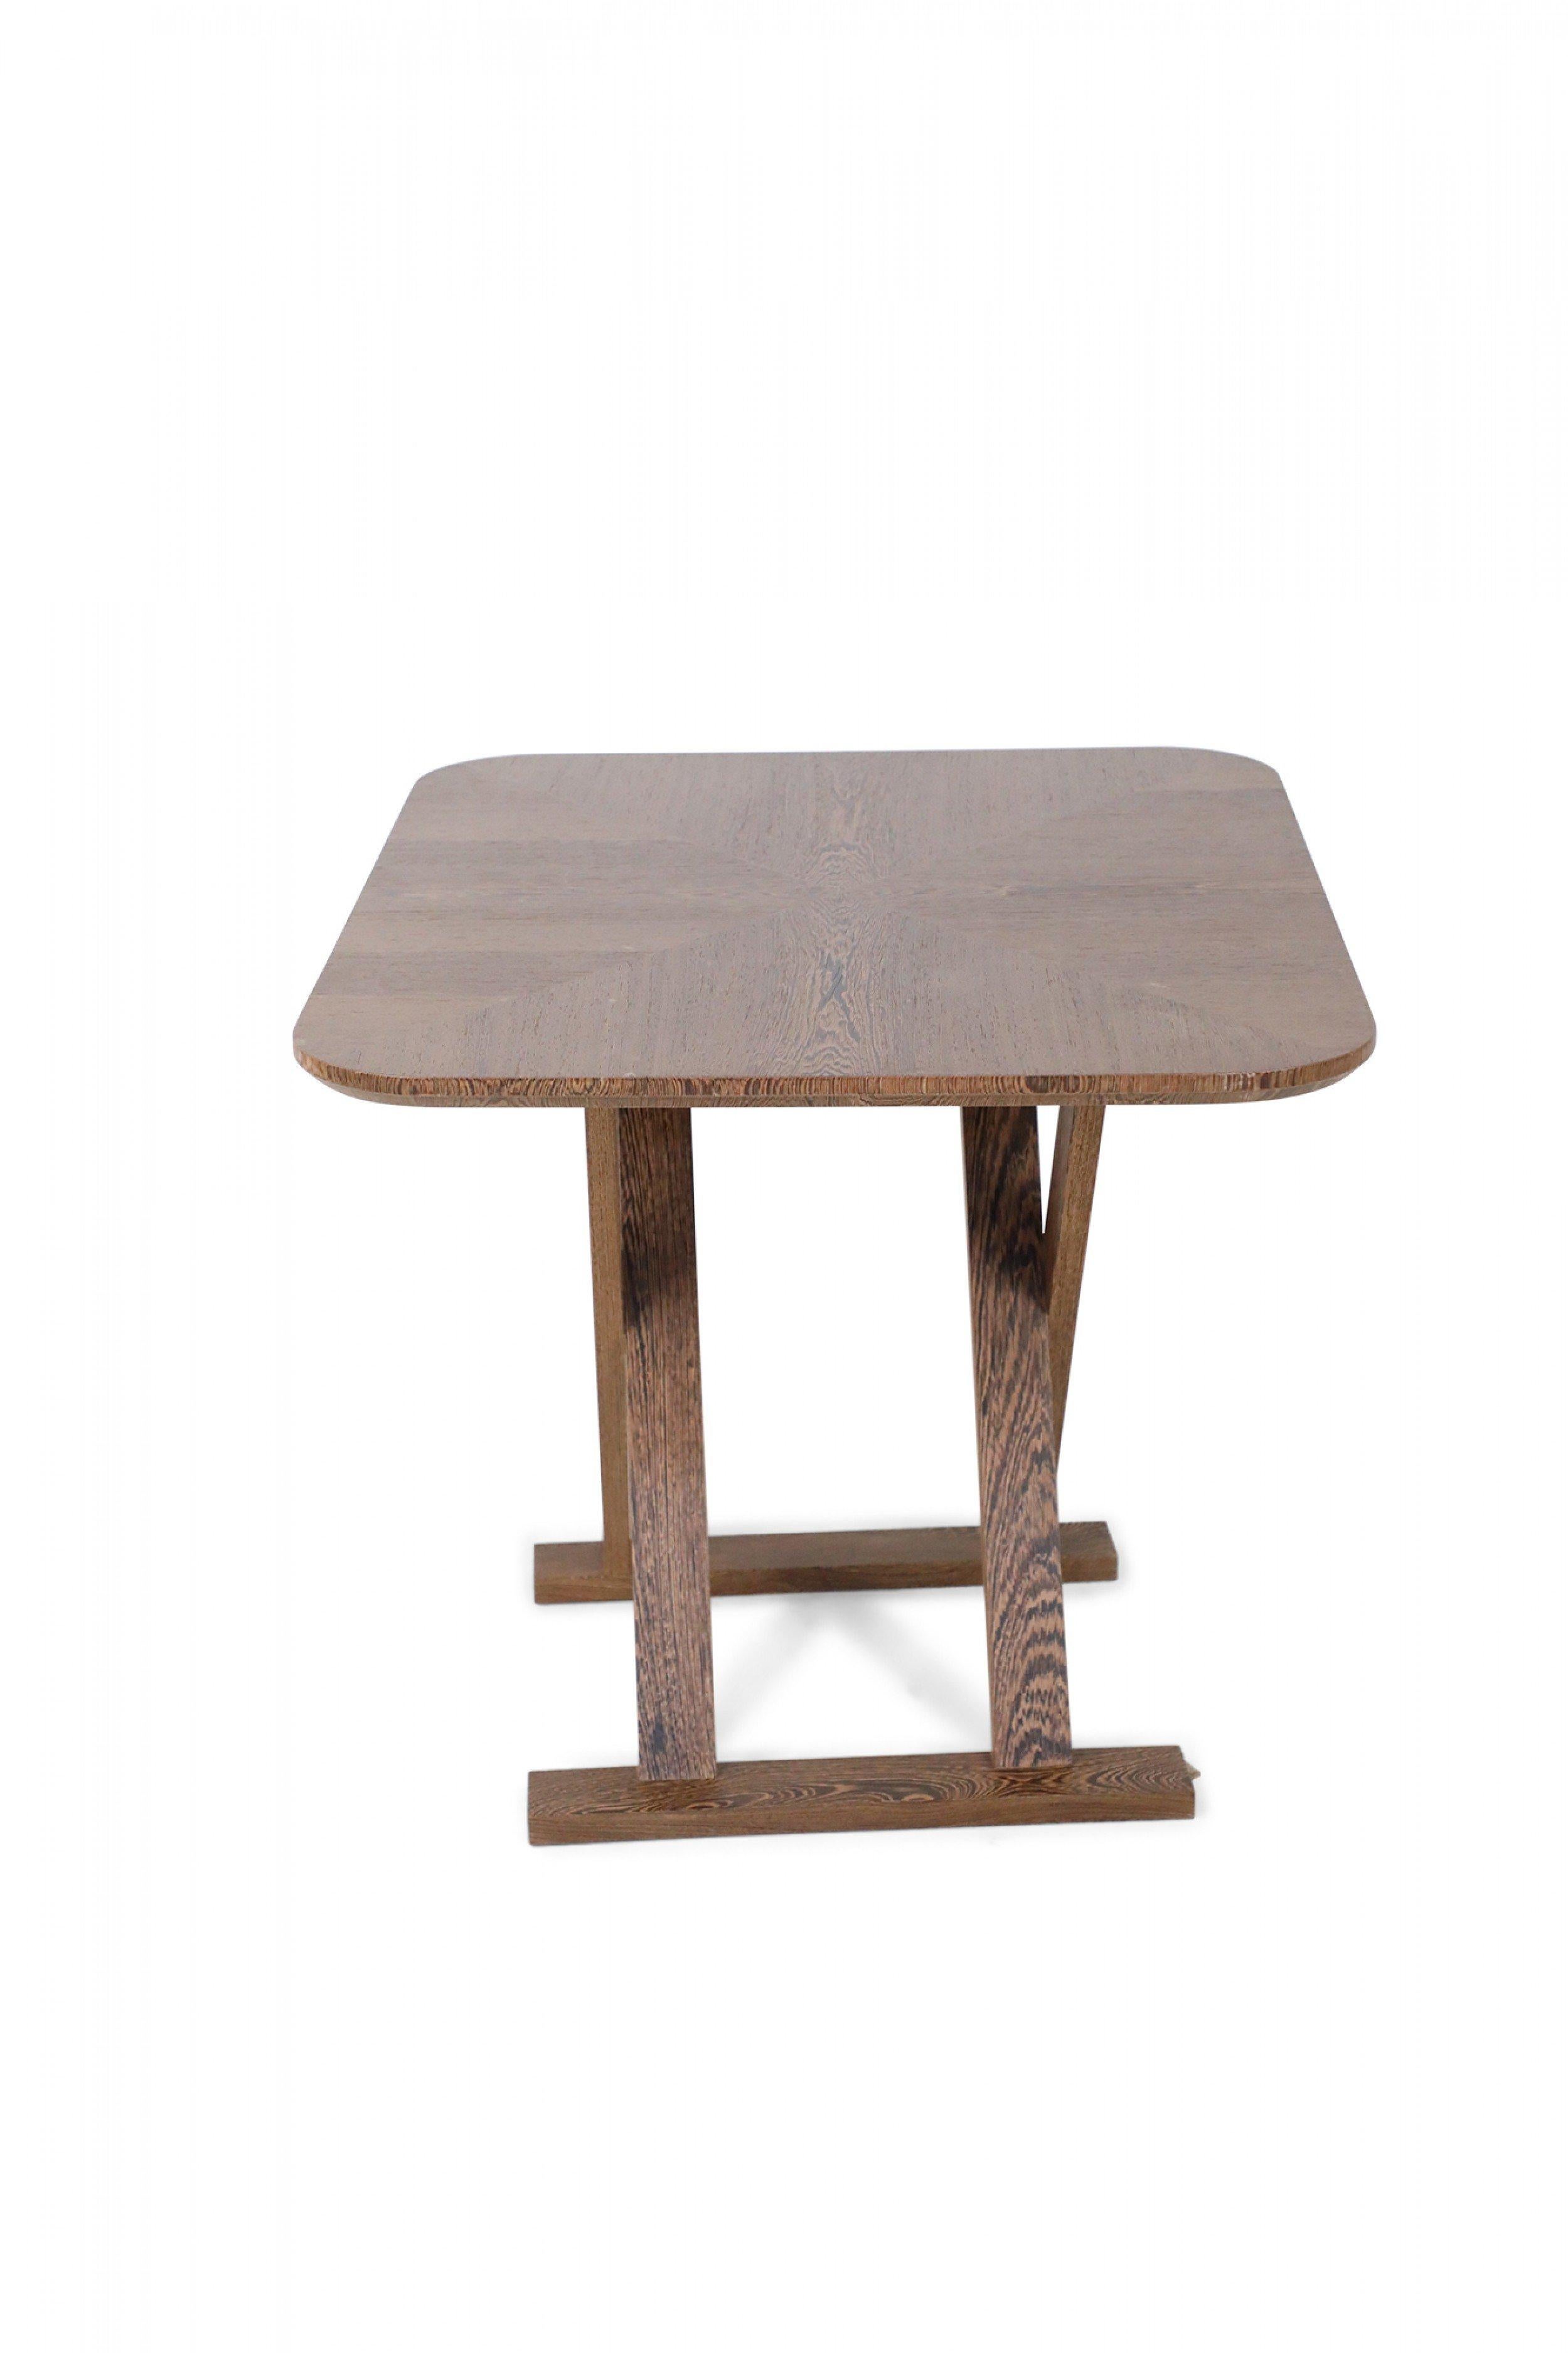 Mid-century wenge wood tea table with rectangular top and rounded corners above an x-shaped base.
      